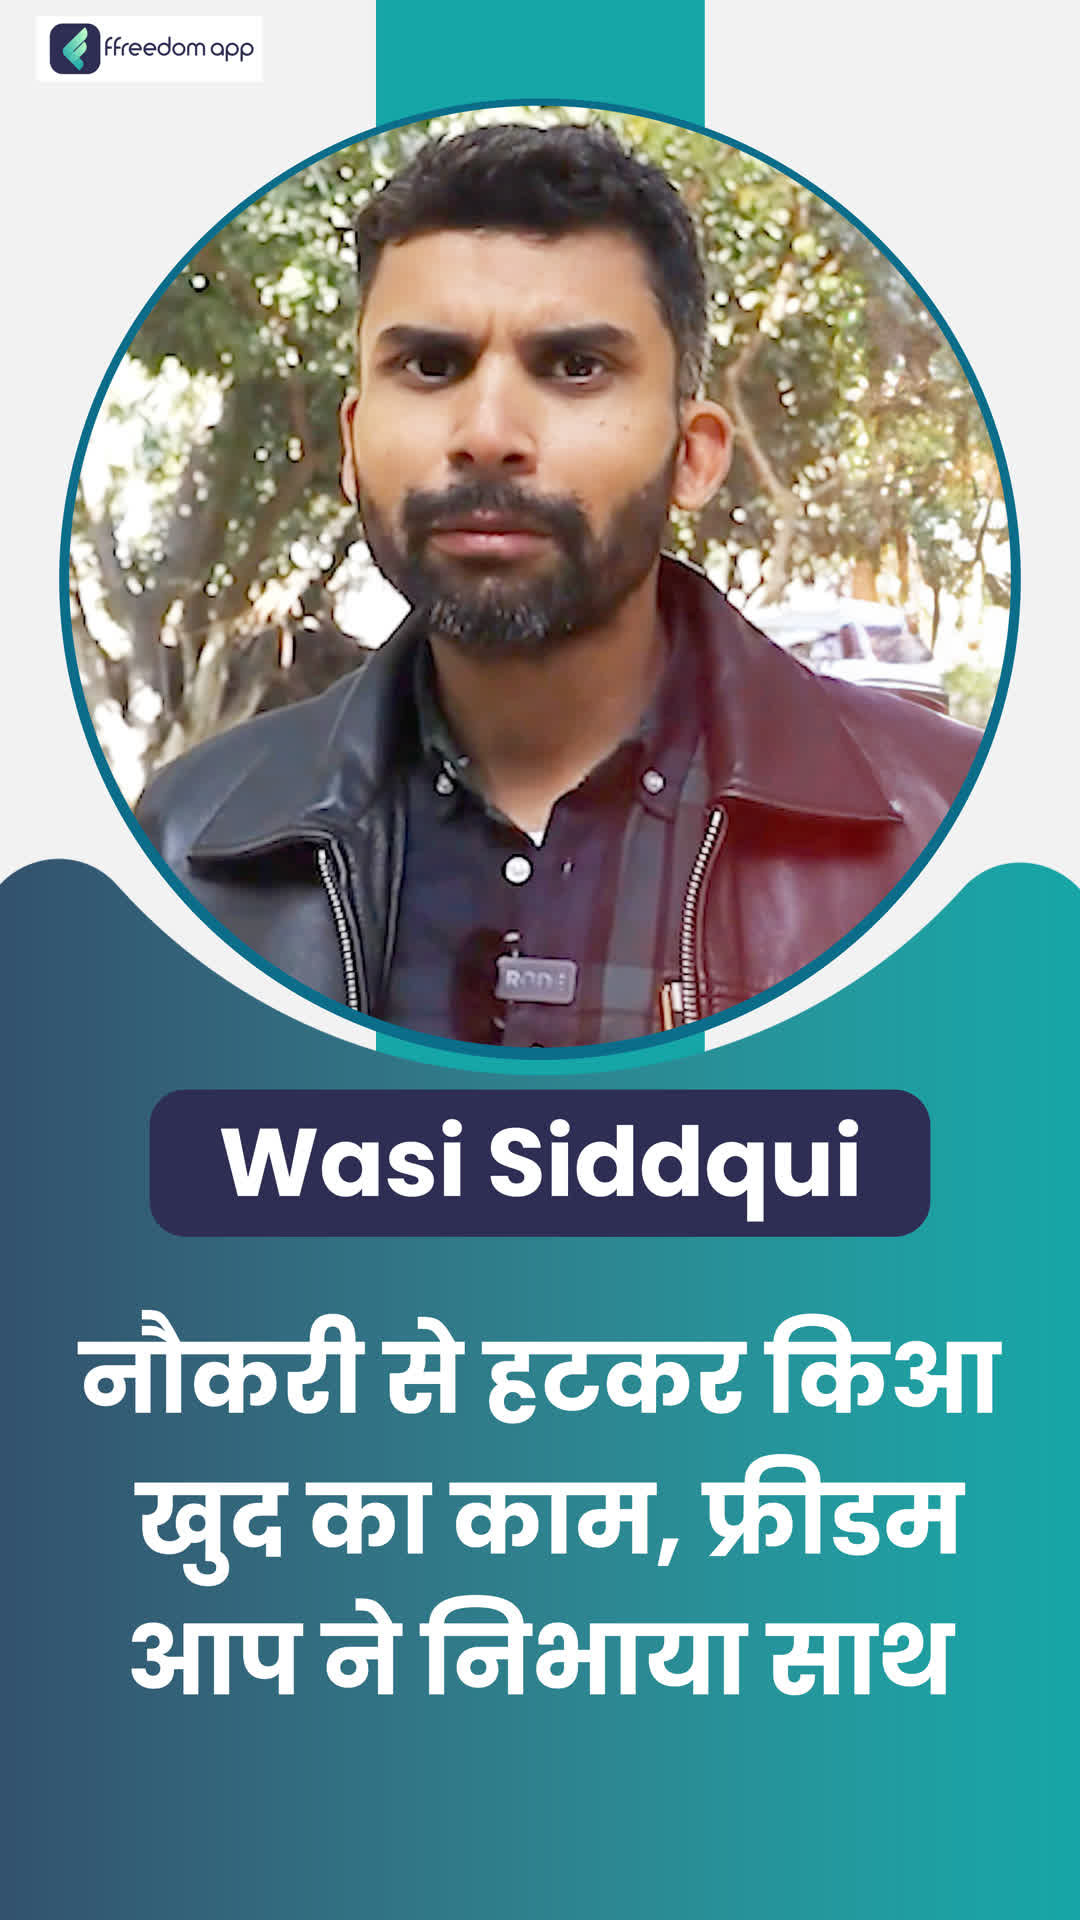 Wasif Ahmed's Honest Review of ffreedom app - Dhubri ,Assam